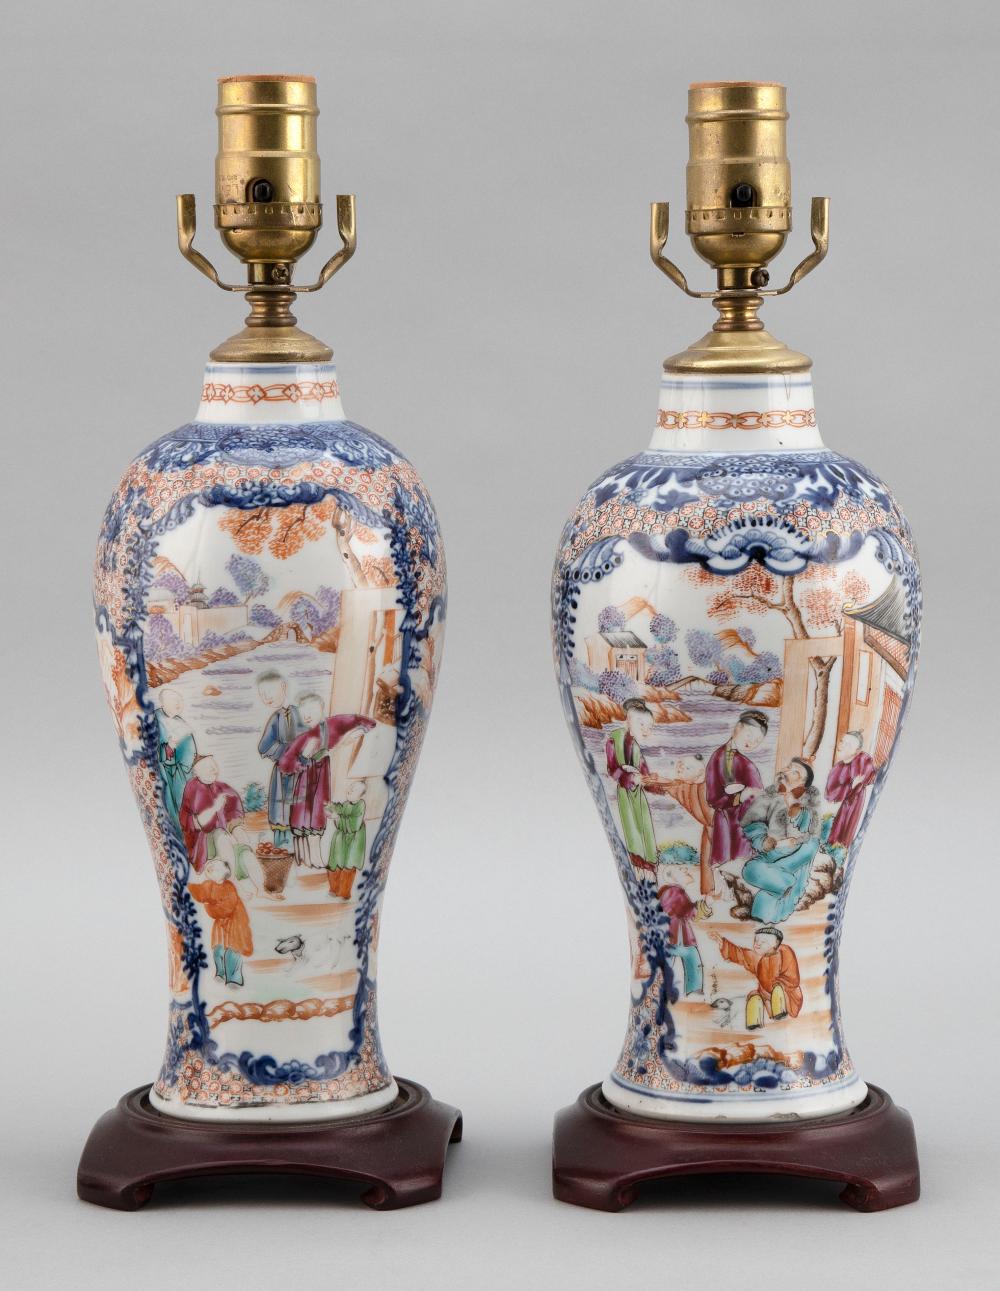 PAIR OF CHINESE EXPORT POLYCHROME